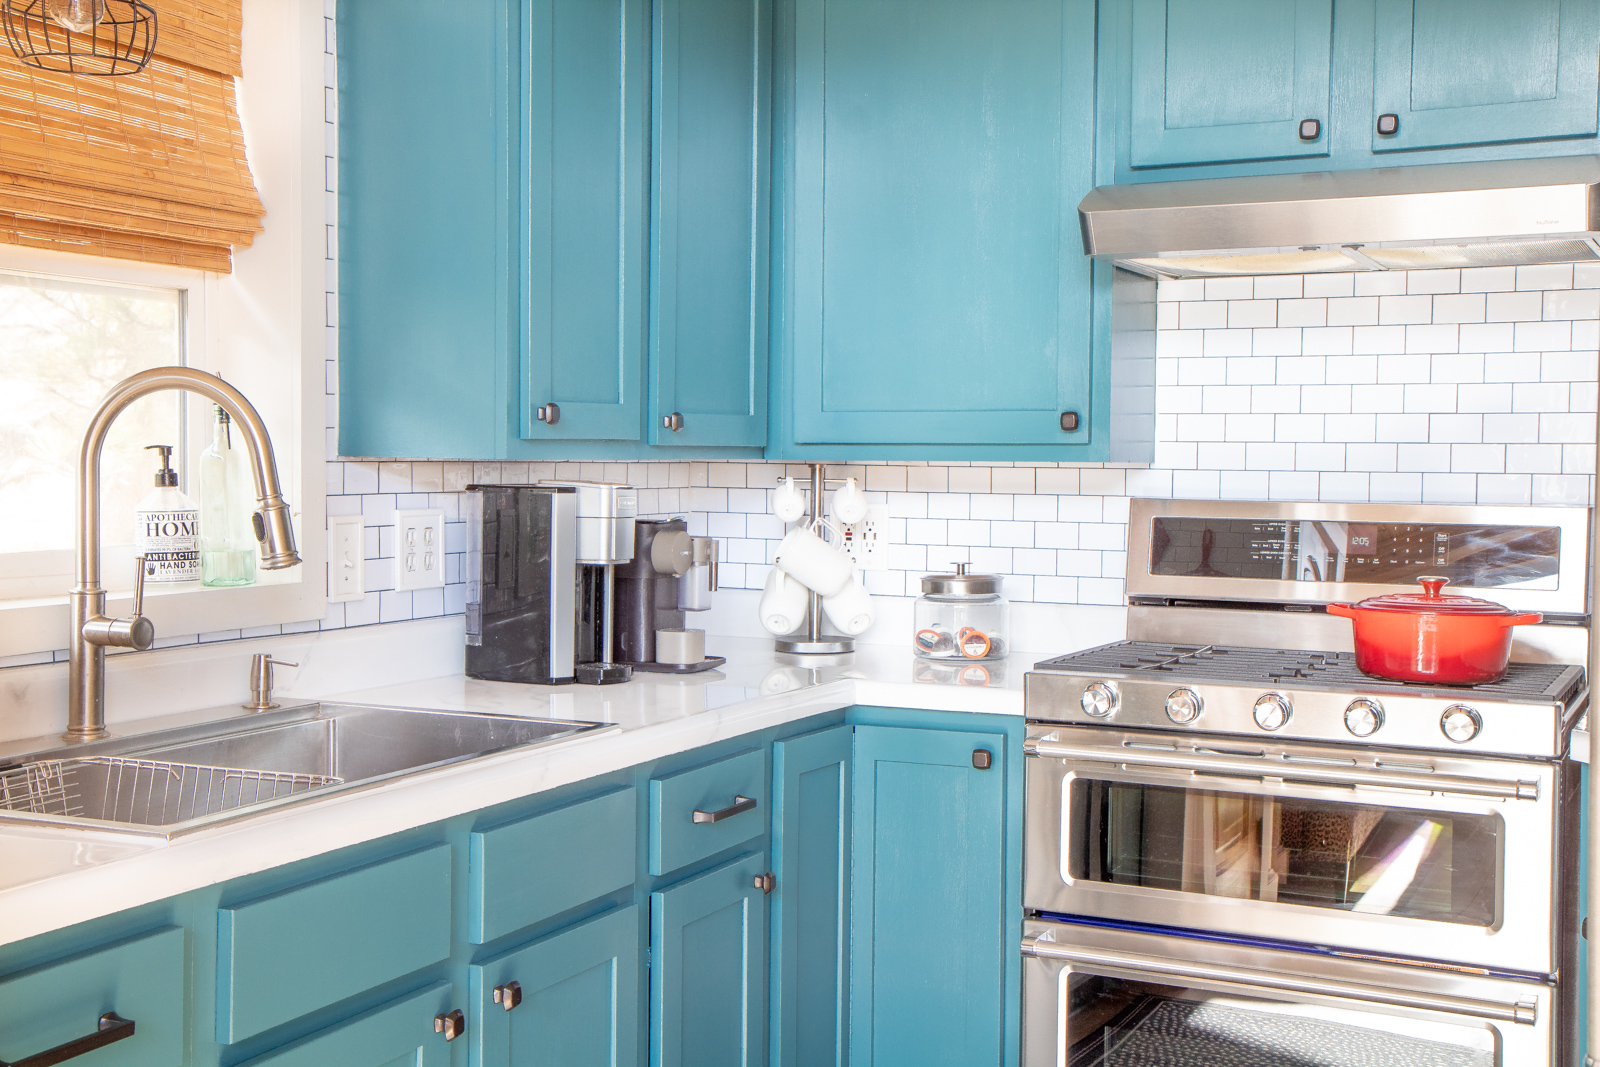 Teal kitchen cabinets white subway tile